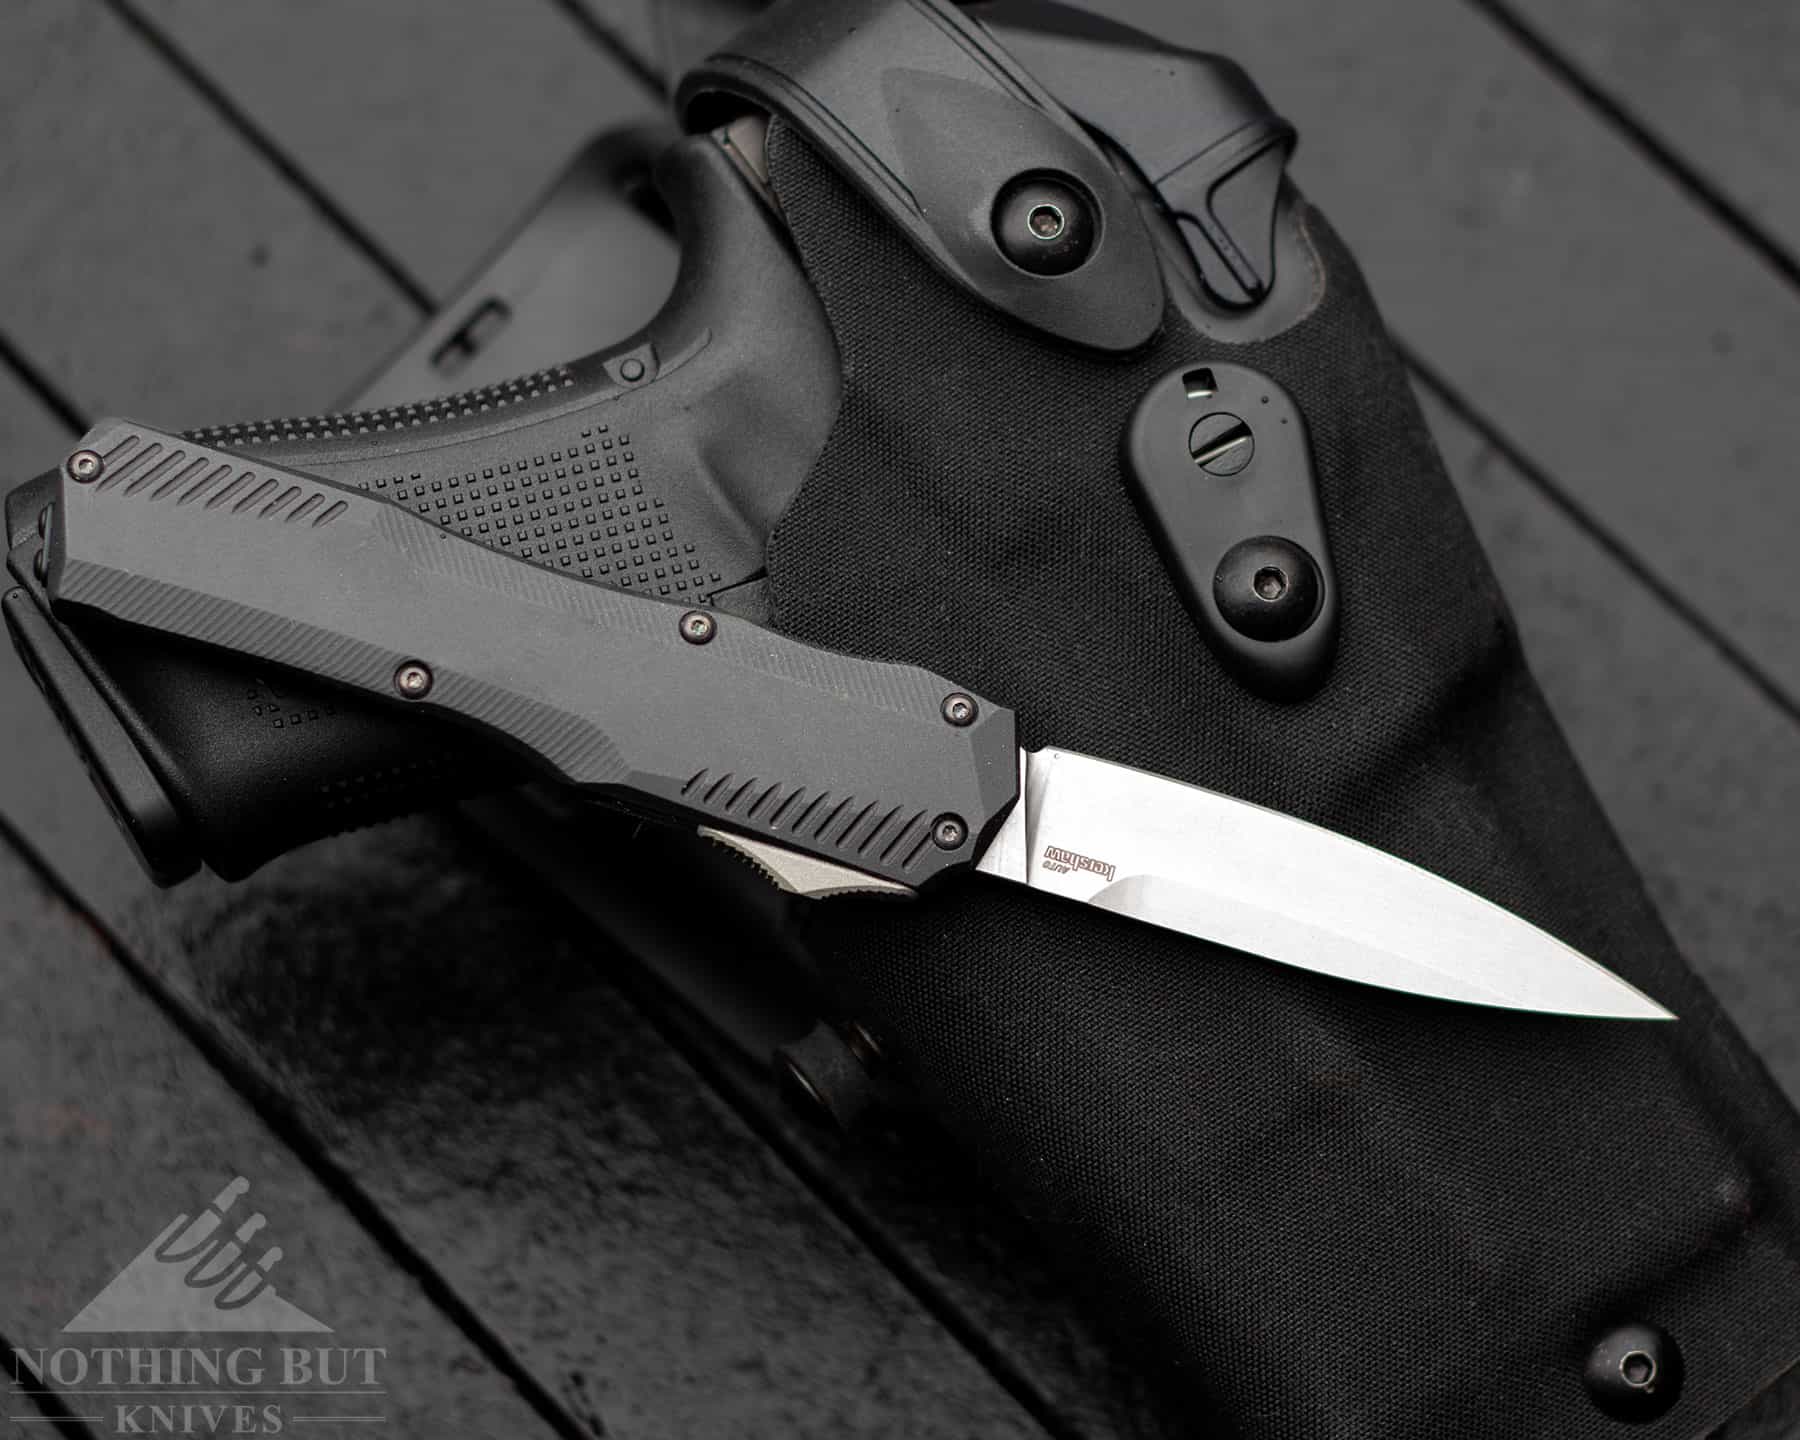 The release of the Kershaw Livewire may be the beginning of a new direction for Kershaw. 